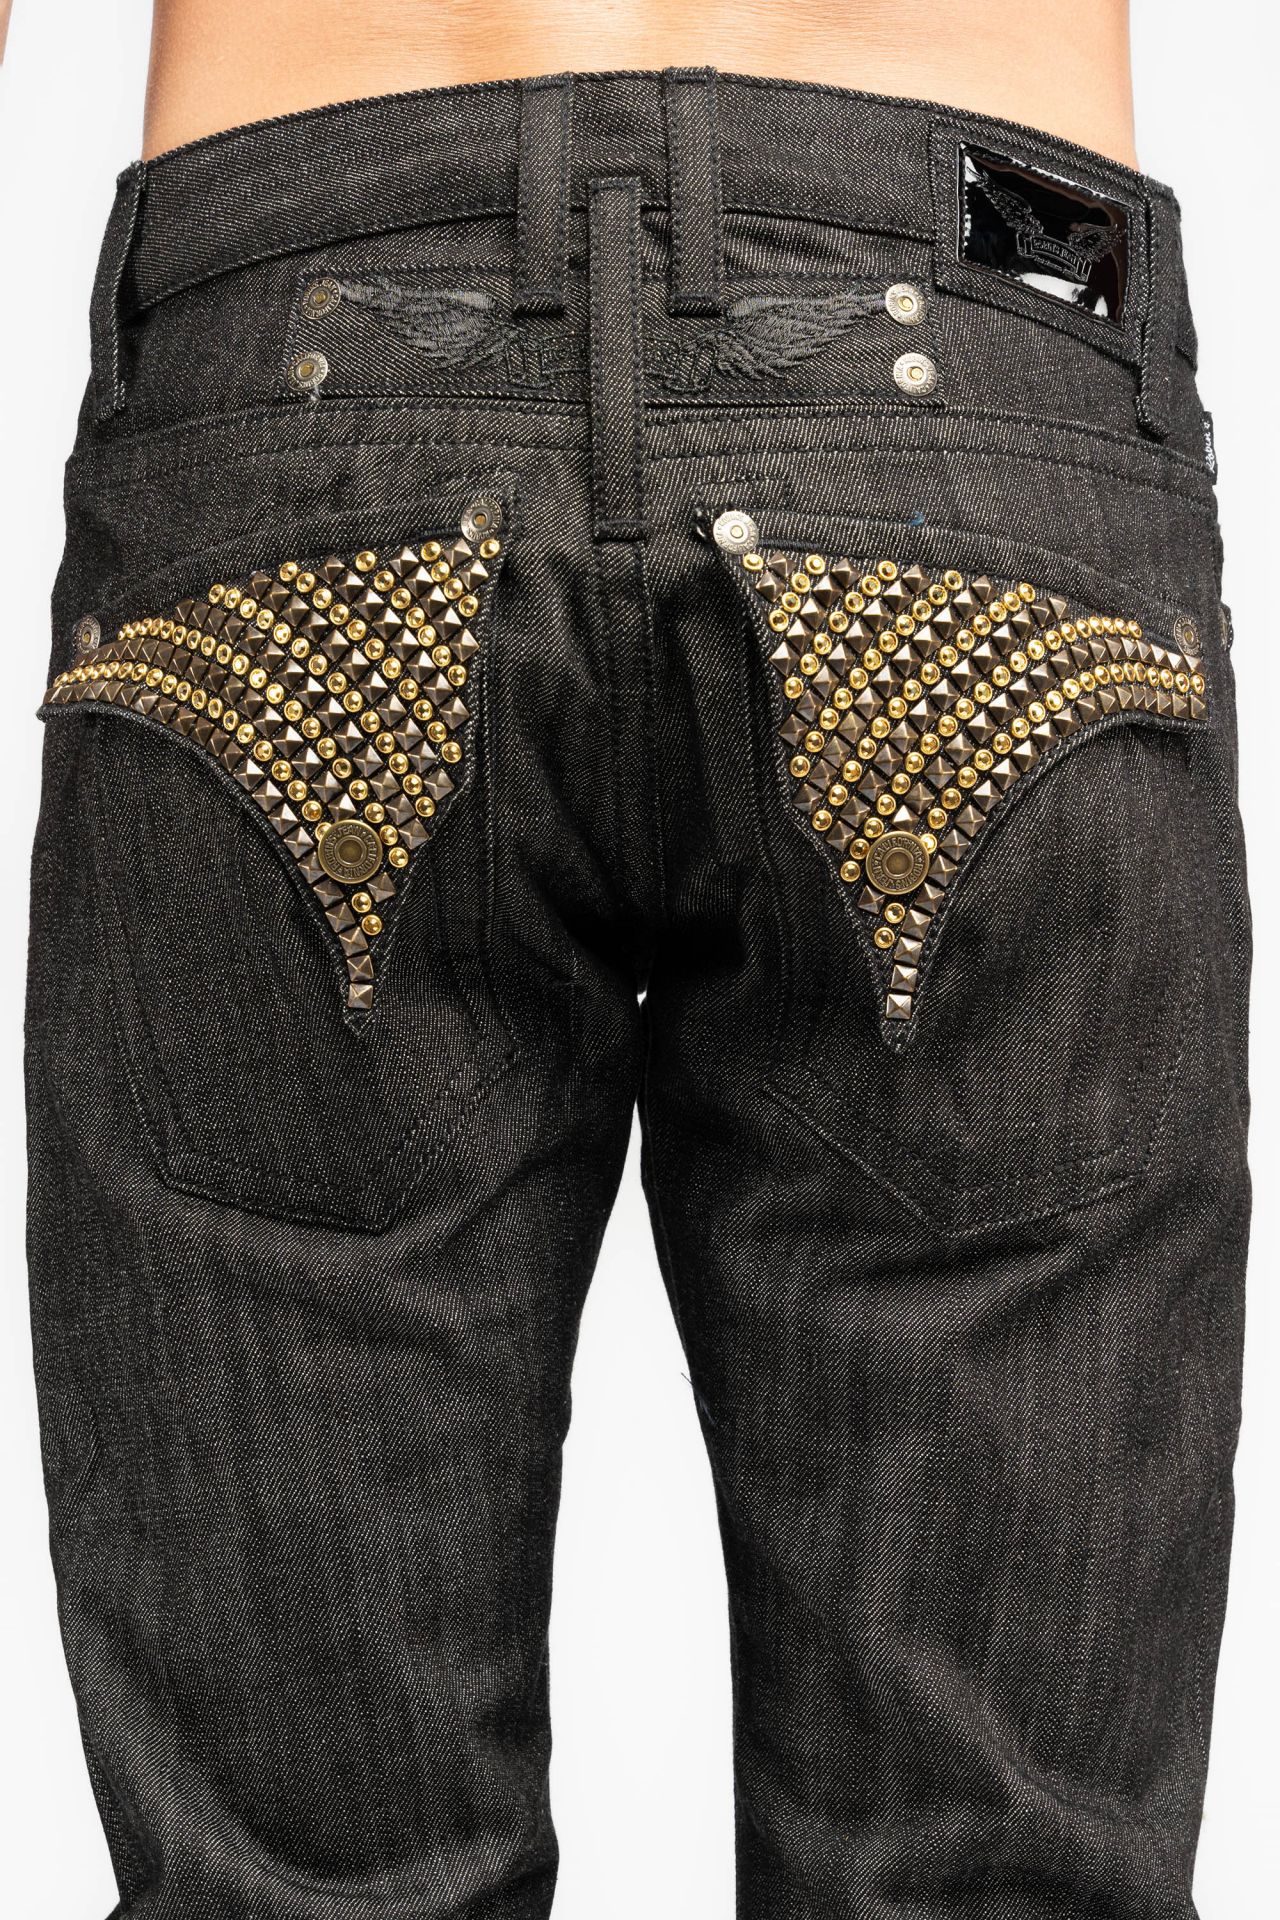 RAW DENIM COLLECTION MENS STRAIGHT LEG LONG FLAP JEANS WITH STUDS AND ...